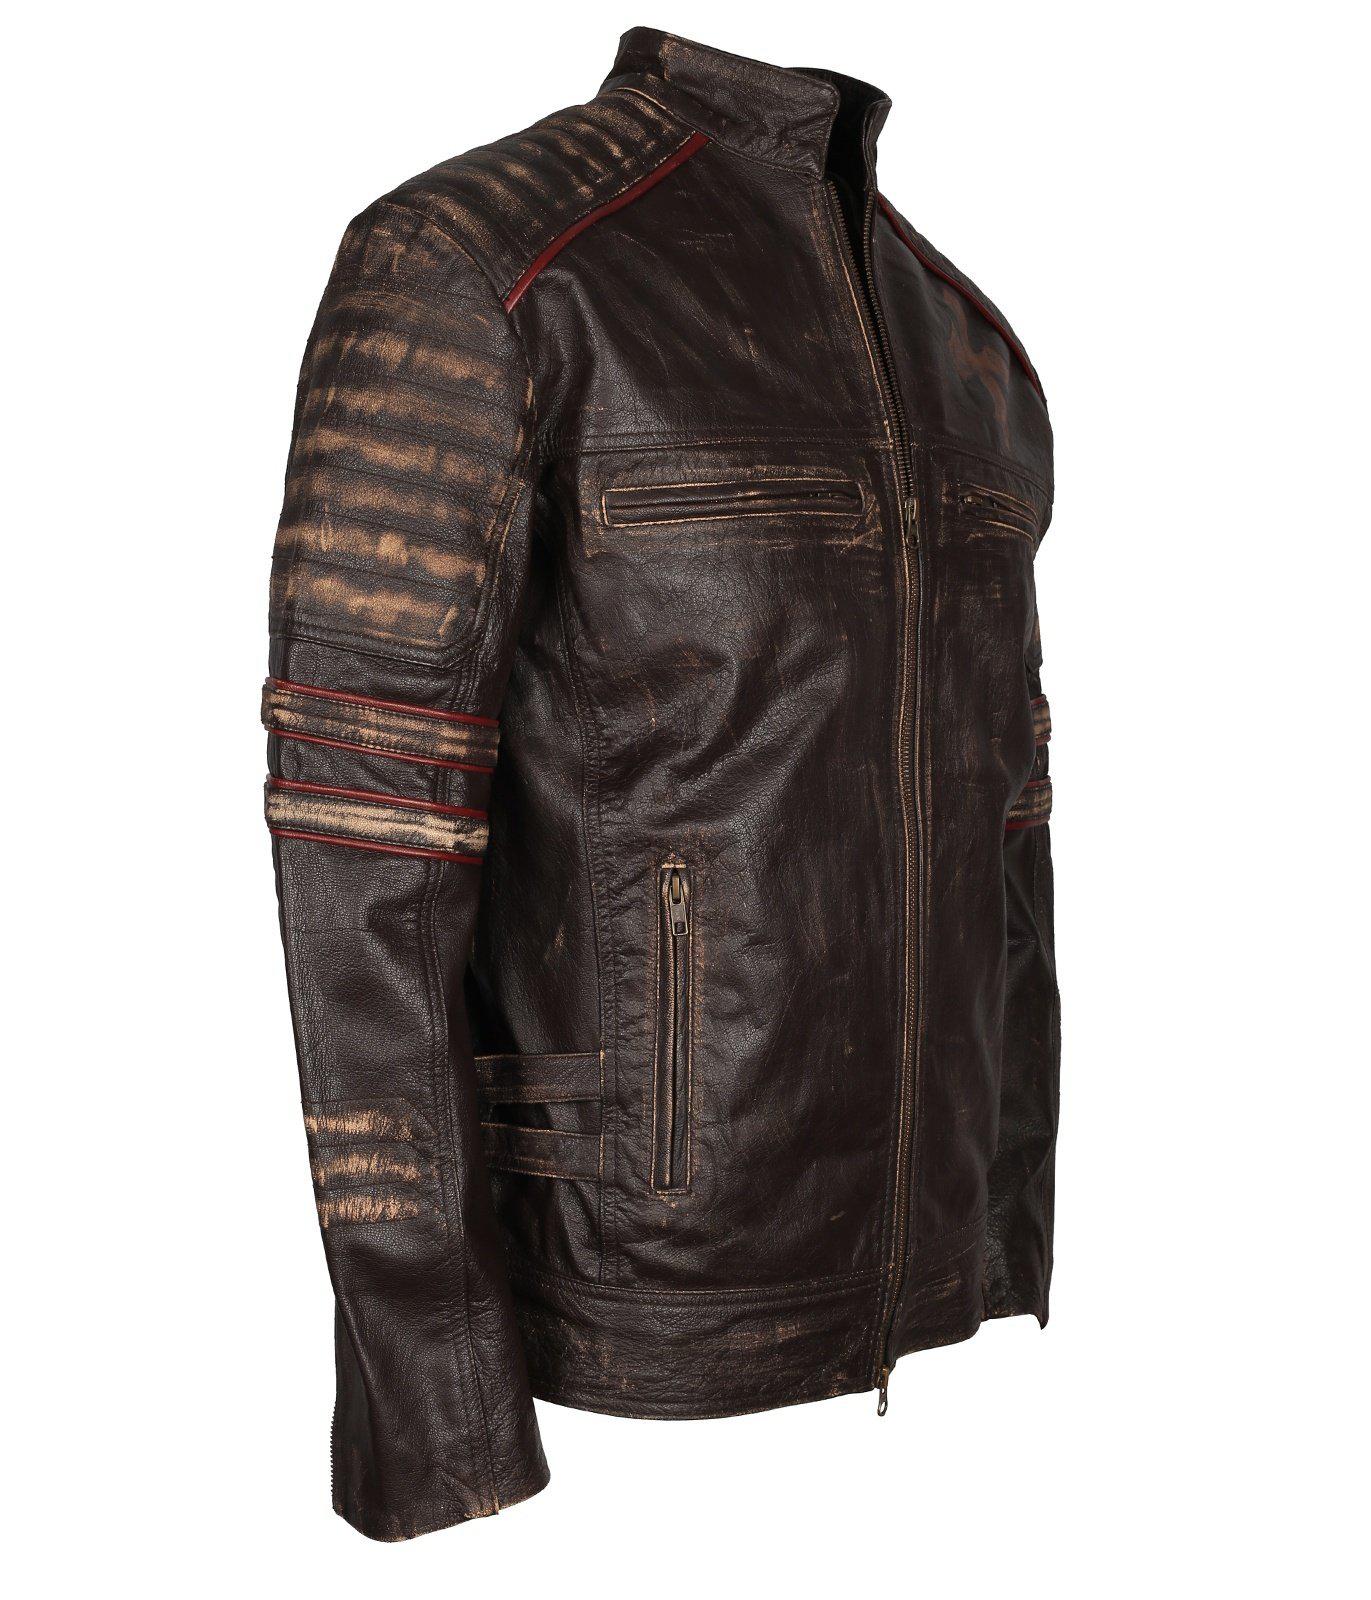 Vintage Leather Jacket with Cross